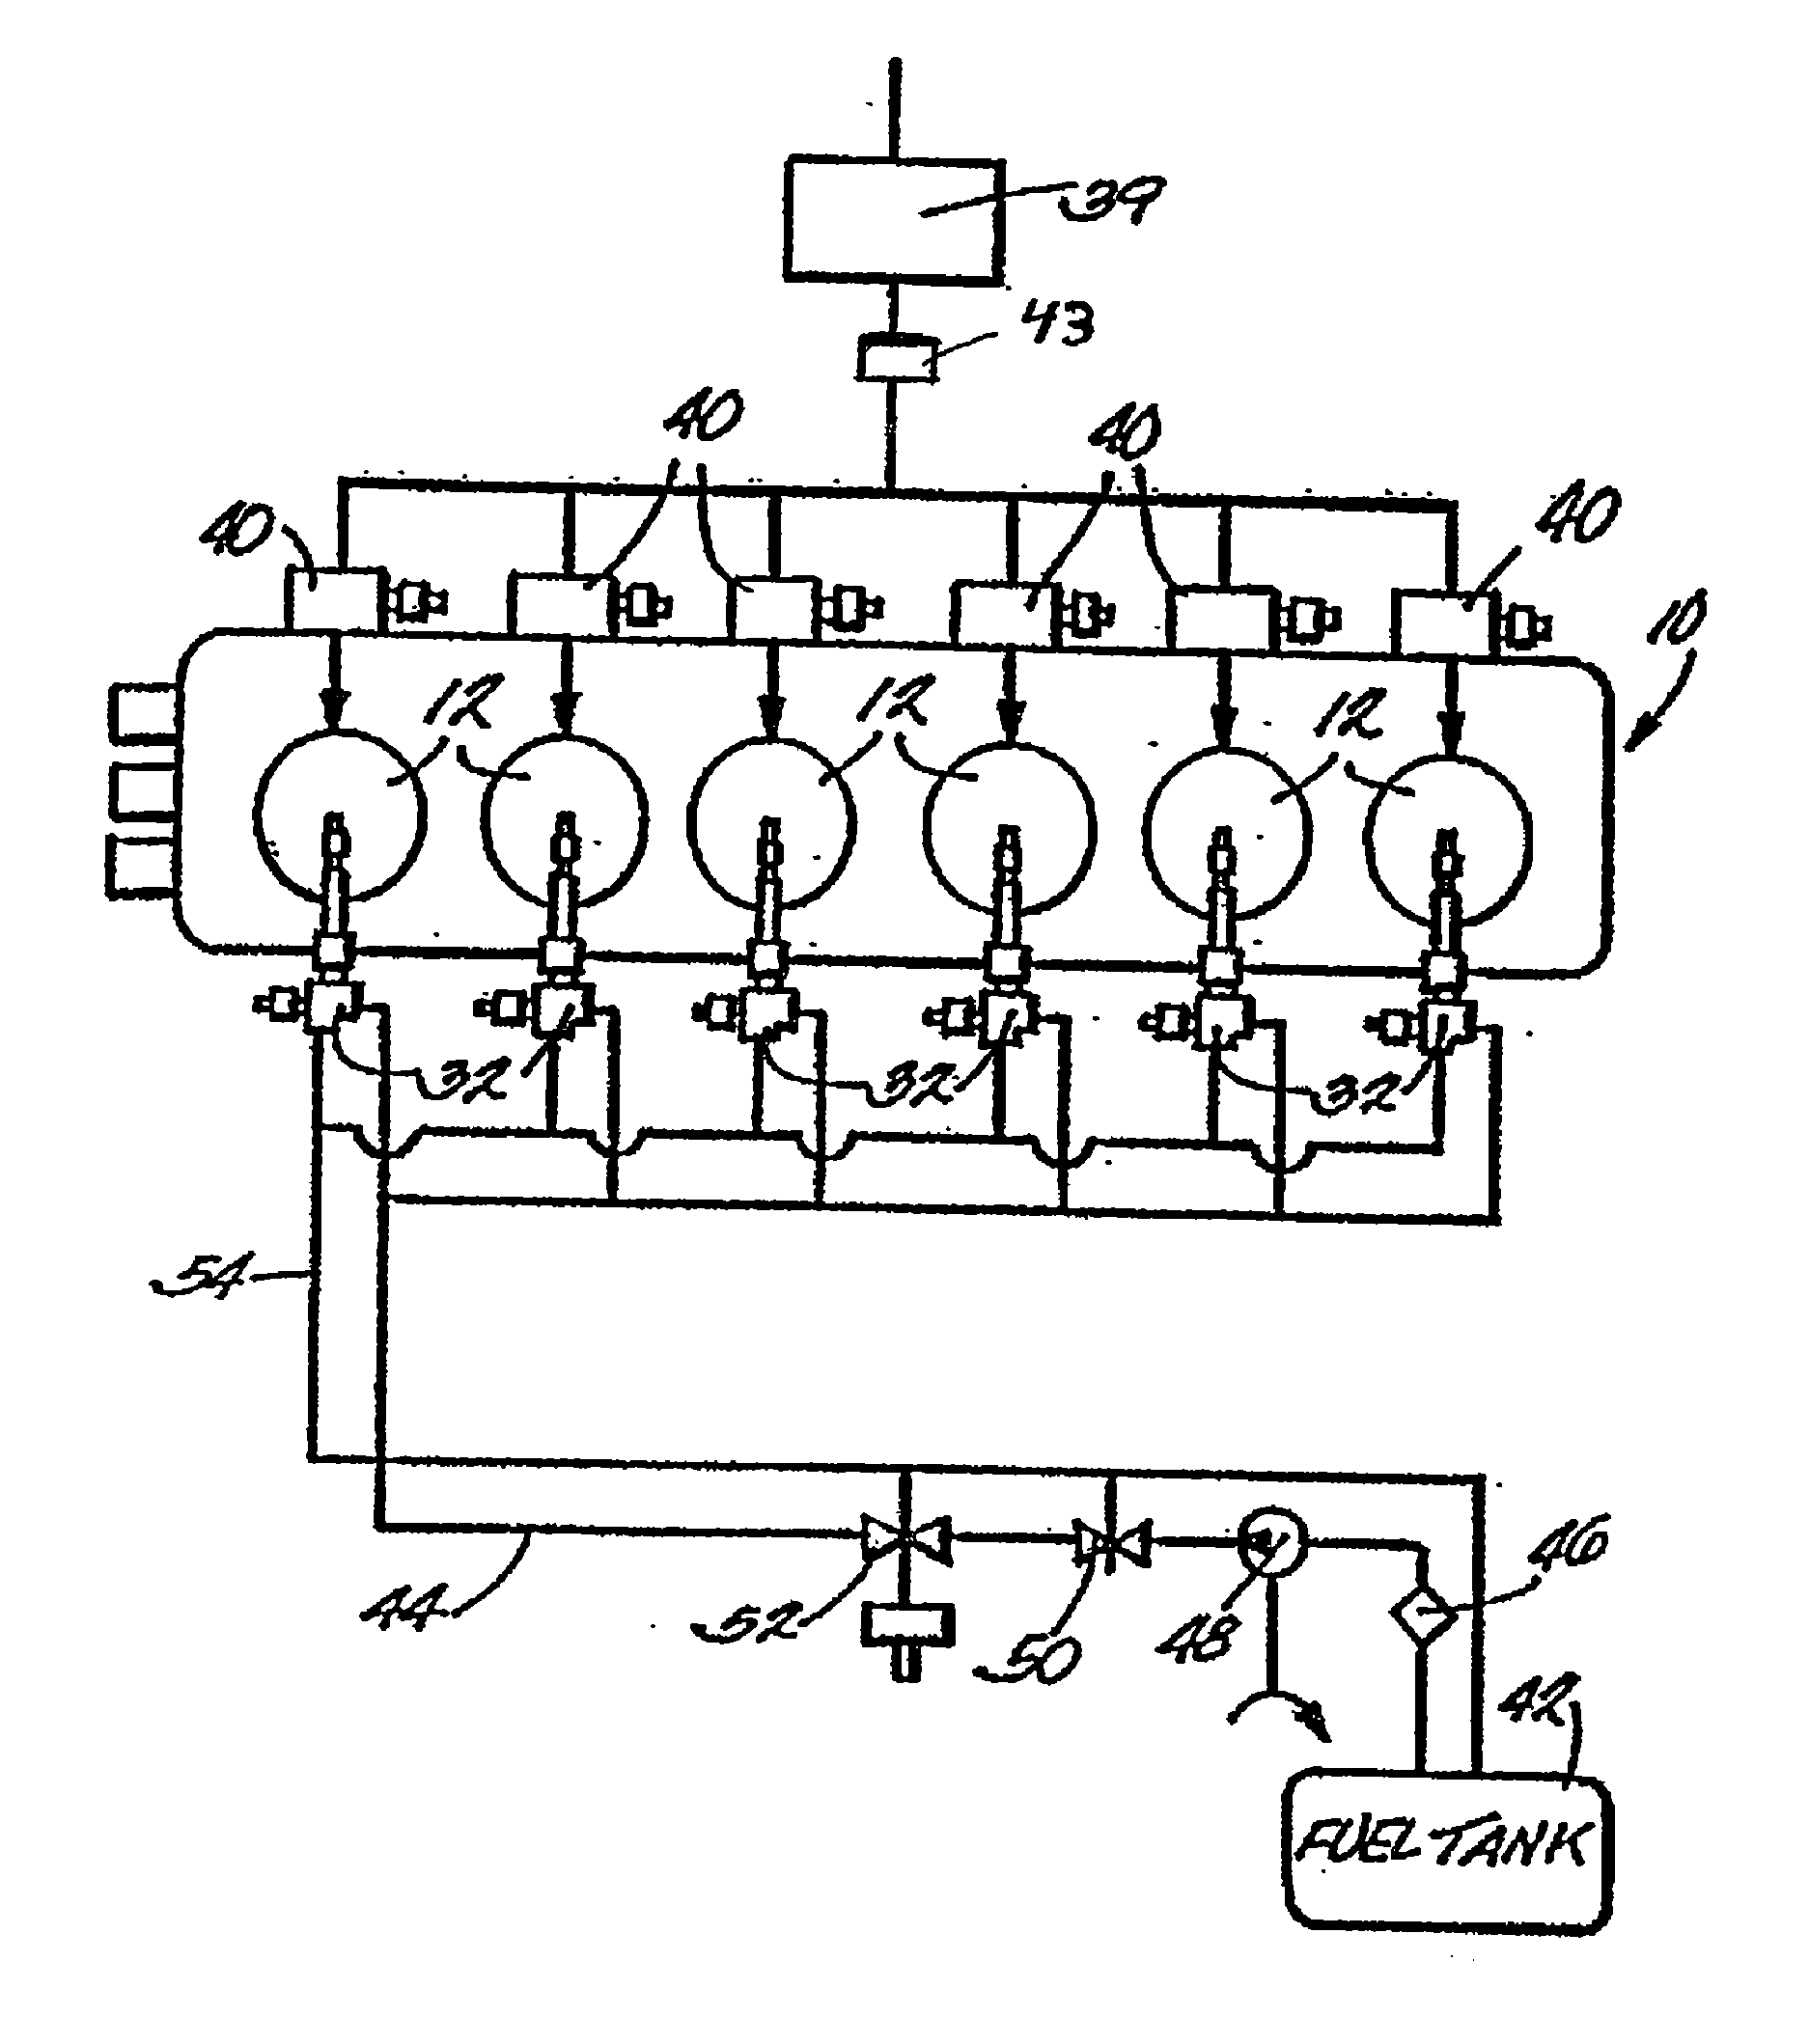 Method and apparatus for adaptive feedback control of an excess air ratio in a compression ignition natural gas engine